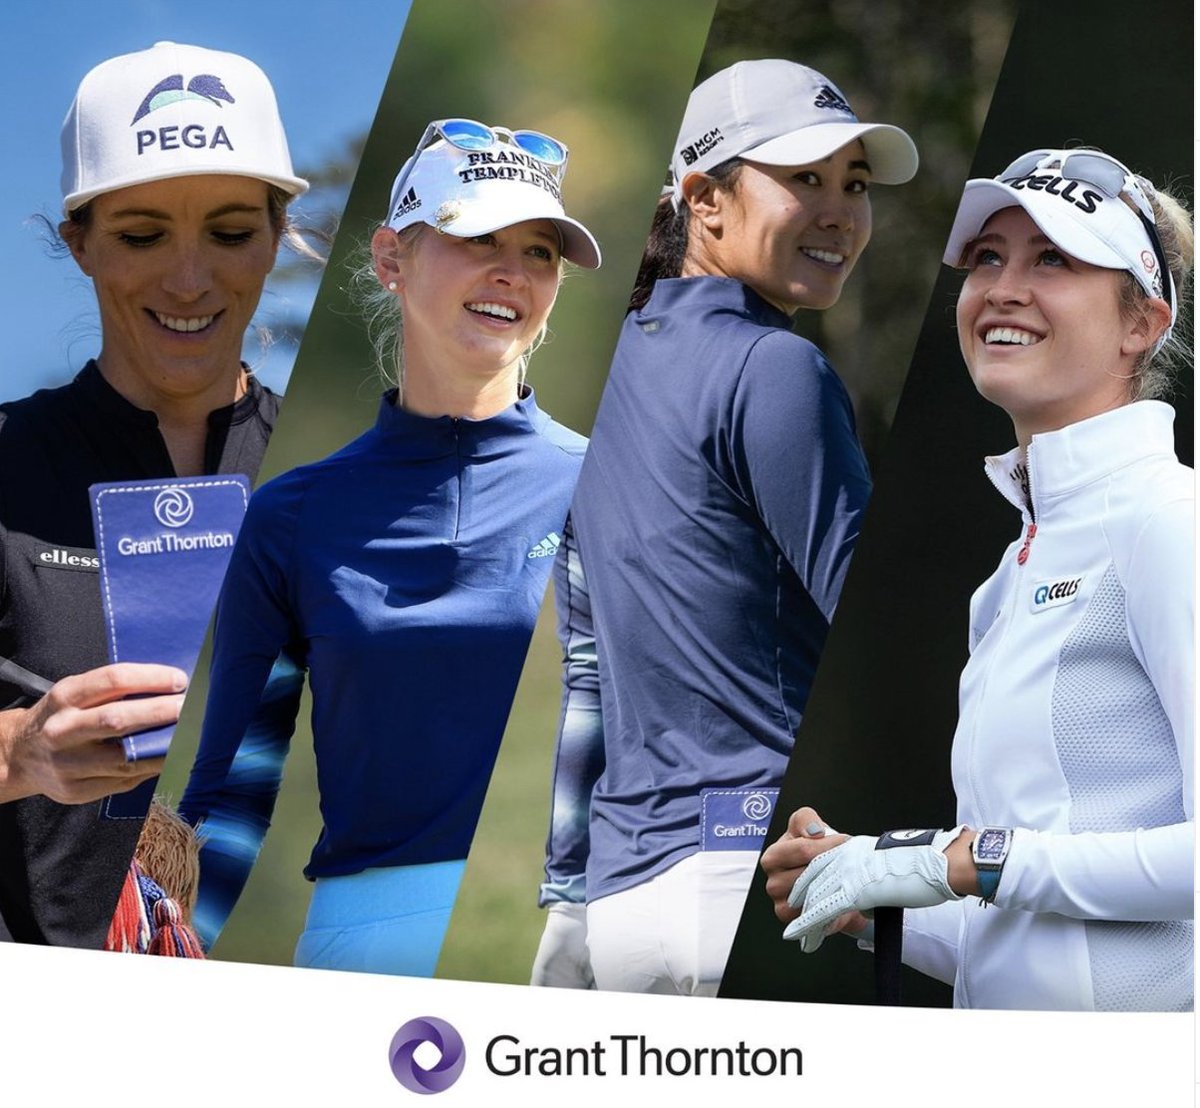 Grant Thornton has done an unbelievable job here, all four of their LPGA ambassadors will be heading to Tokyo, in addition they also have Morikawa on the men's side going to Tokyo, that equals to 5/8 for them in heading to the Olympics

Doesn't even include their ringer, R Fowler https://t.co/9nv38ZVtW4